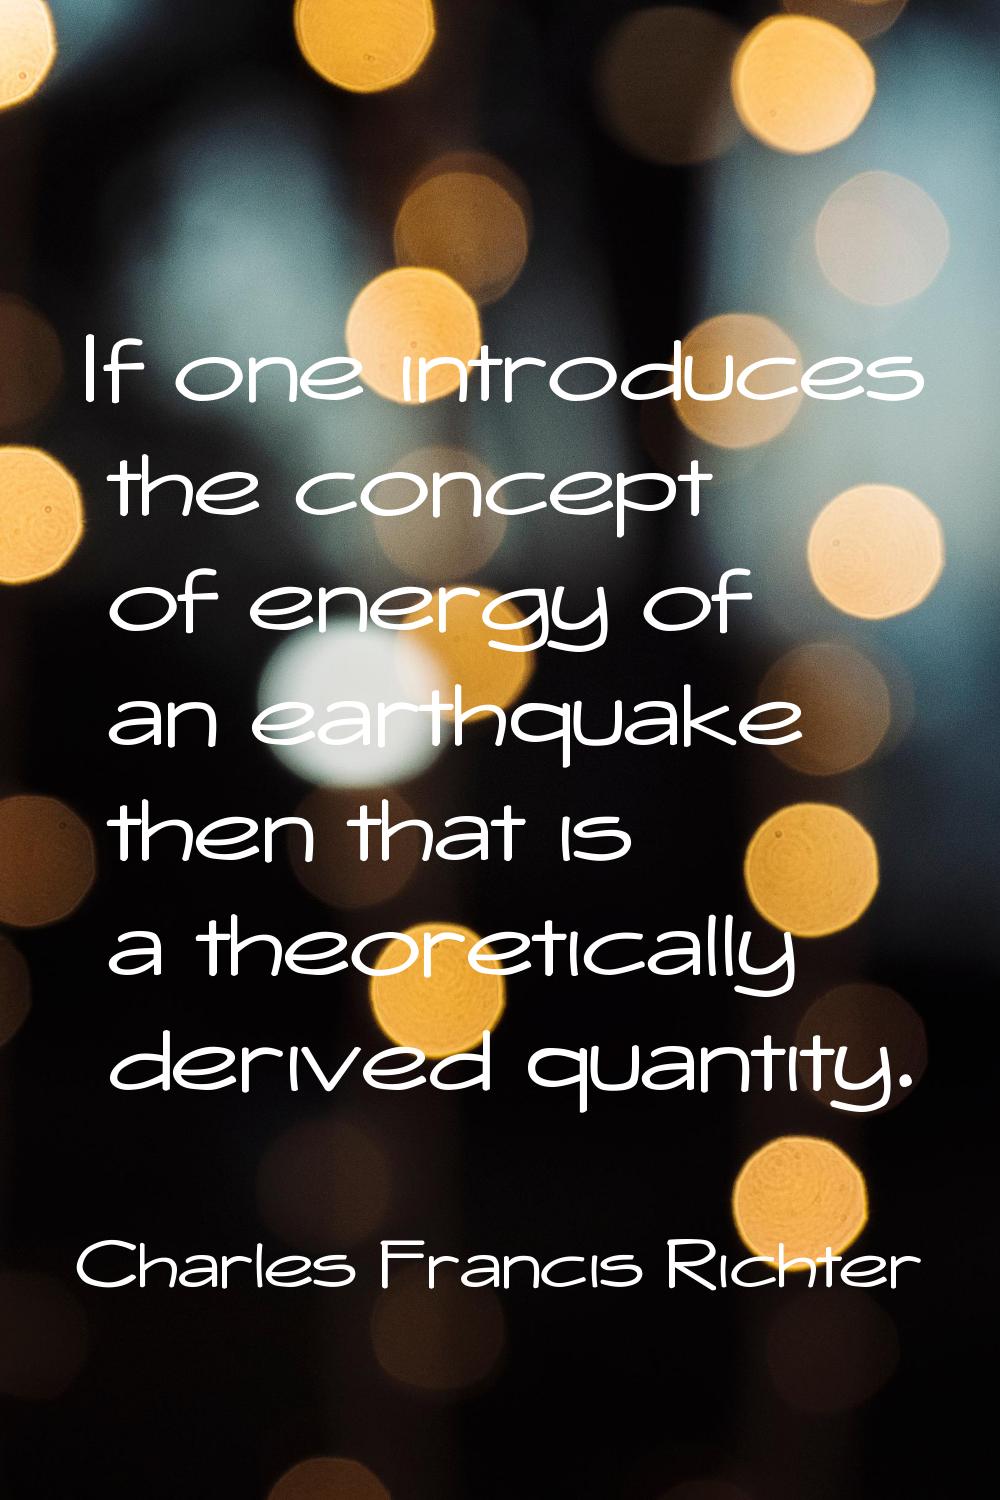 If one introduces the concept of energy of an earthquake then that is a theoretically derived quant